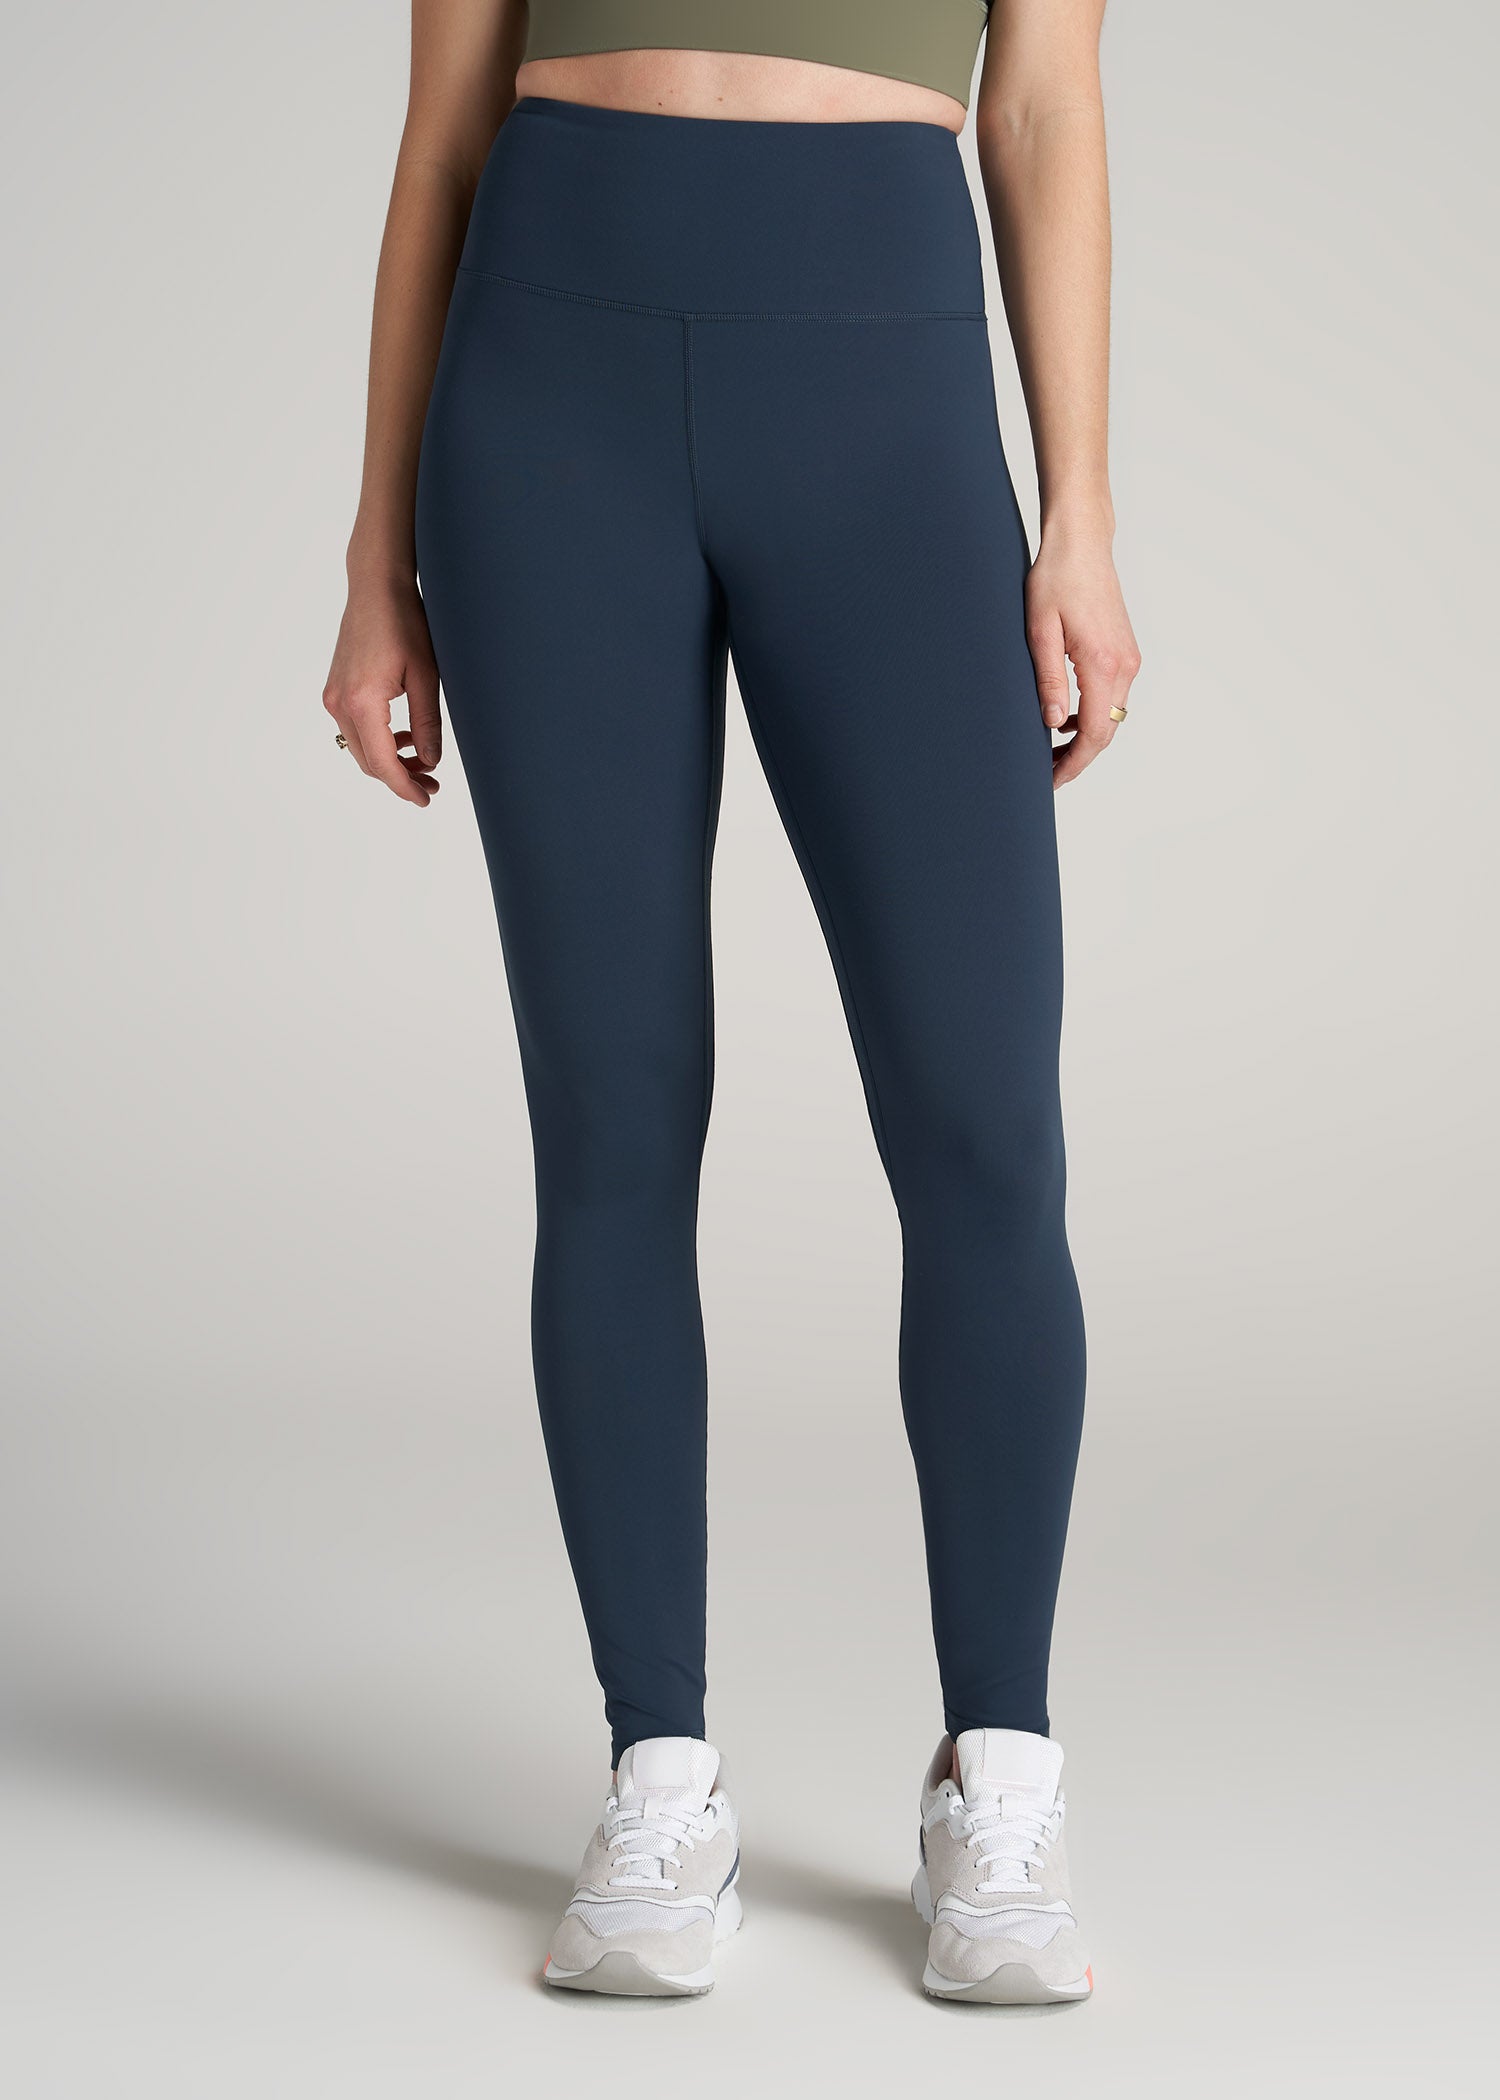 No Front Seam Leggings - Buttery Soft Workout Active Legging for Women